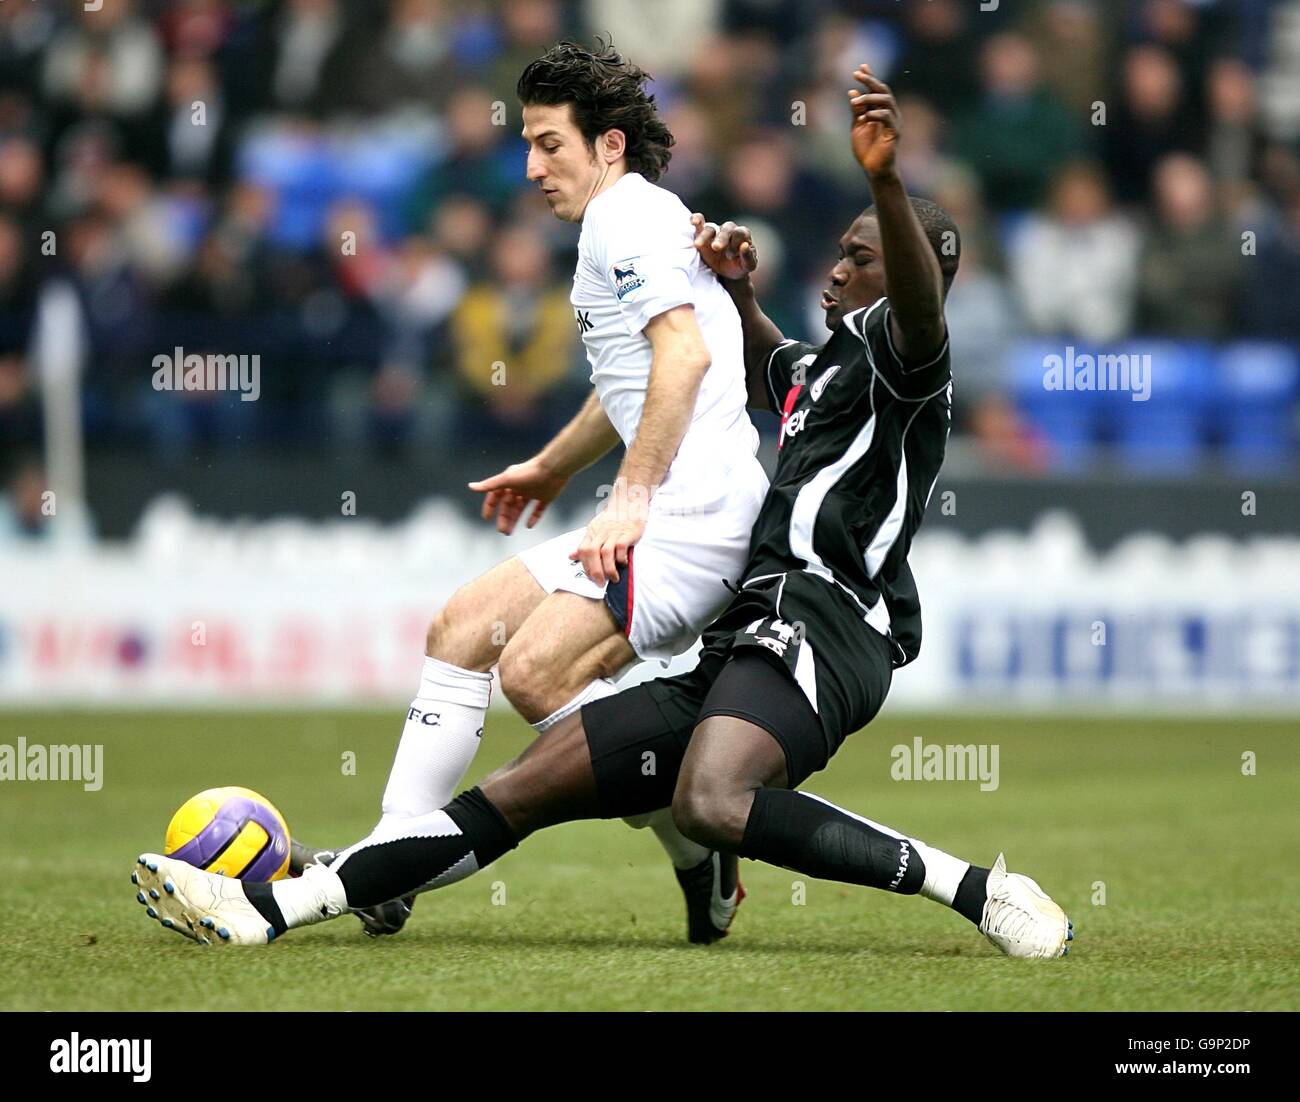 Bolton Wanderers' Andranik Teymourian (l) and Fulham's Papa Bouba Diop (r) battle for the ball Stock Photo